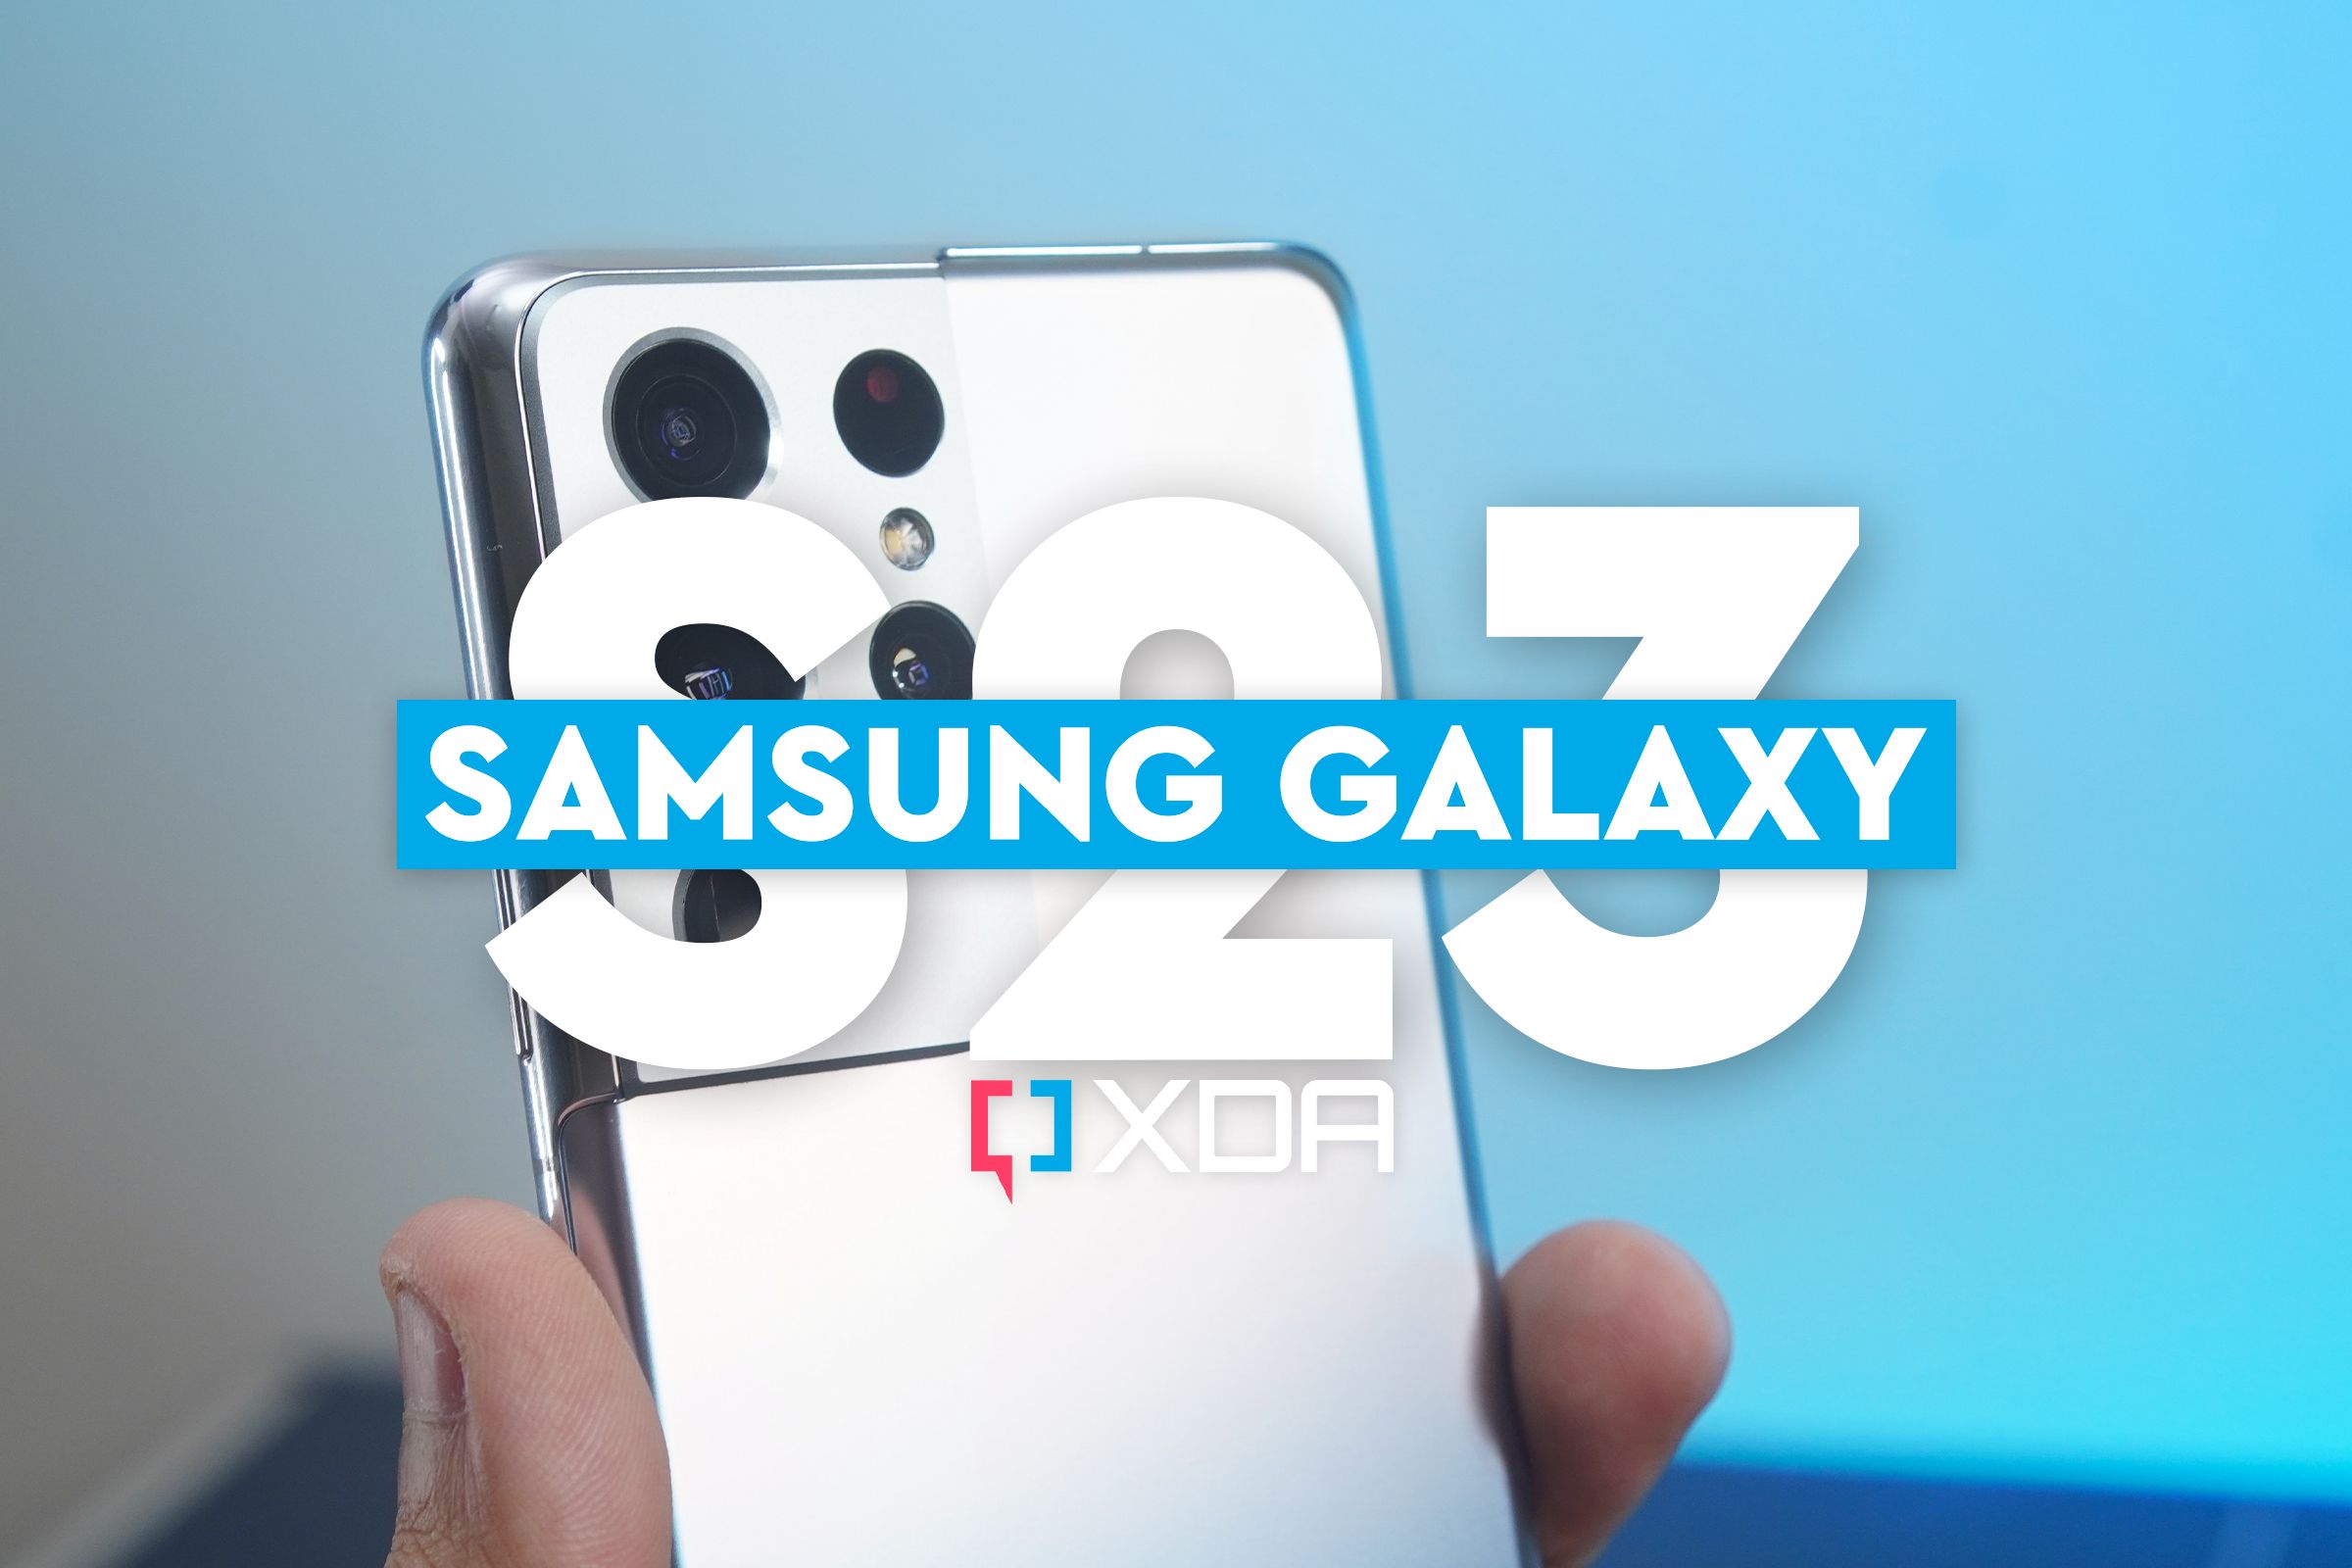 An image of the Samsung Galaxy S21 Ultra with a blue-colored background and text that says 'Samsung Galaxy S23' along with XDA logo.